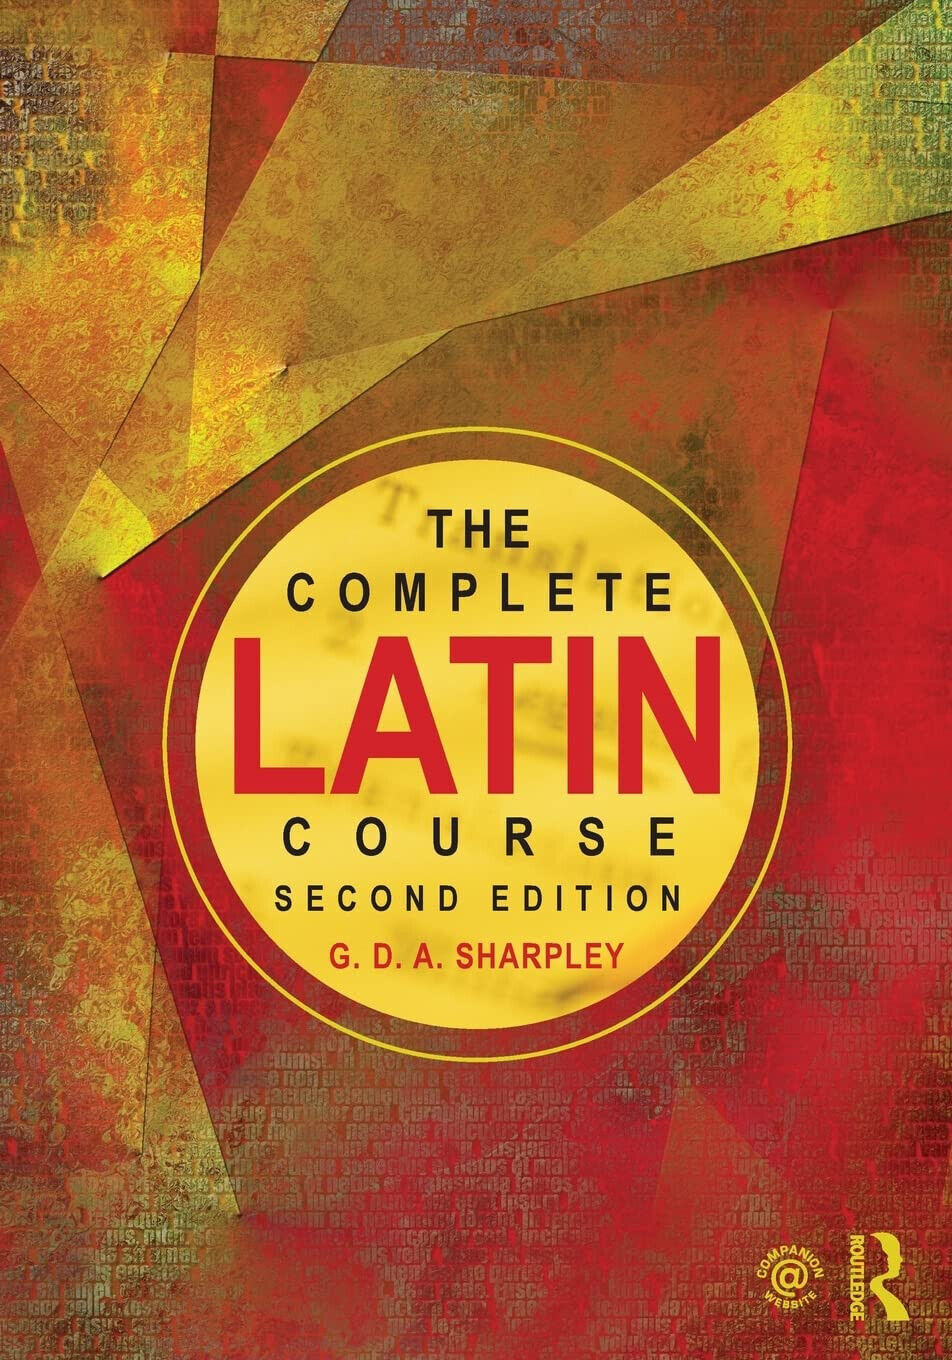 The Complete Latin Course - G. D. A. Sharpley - Routledge, 2014